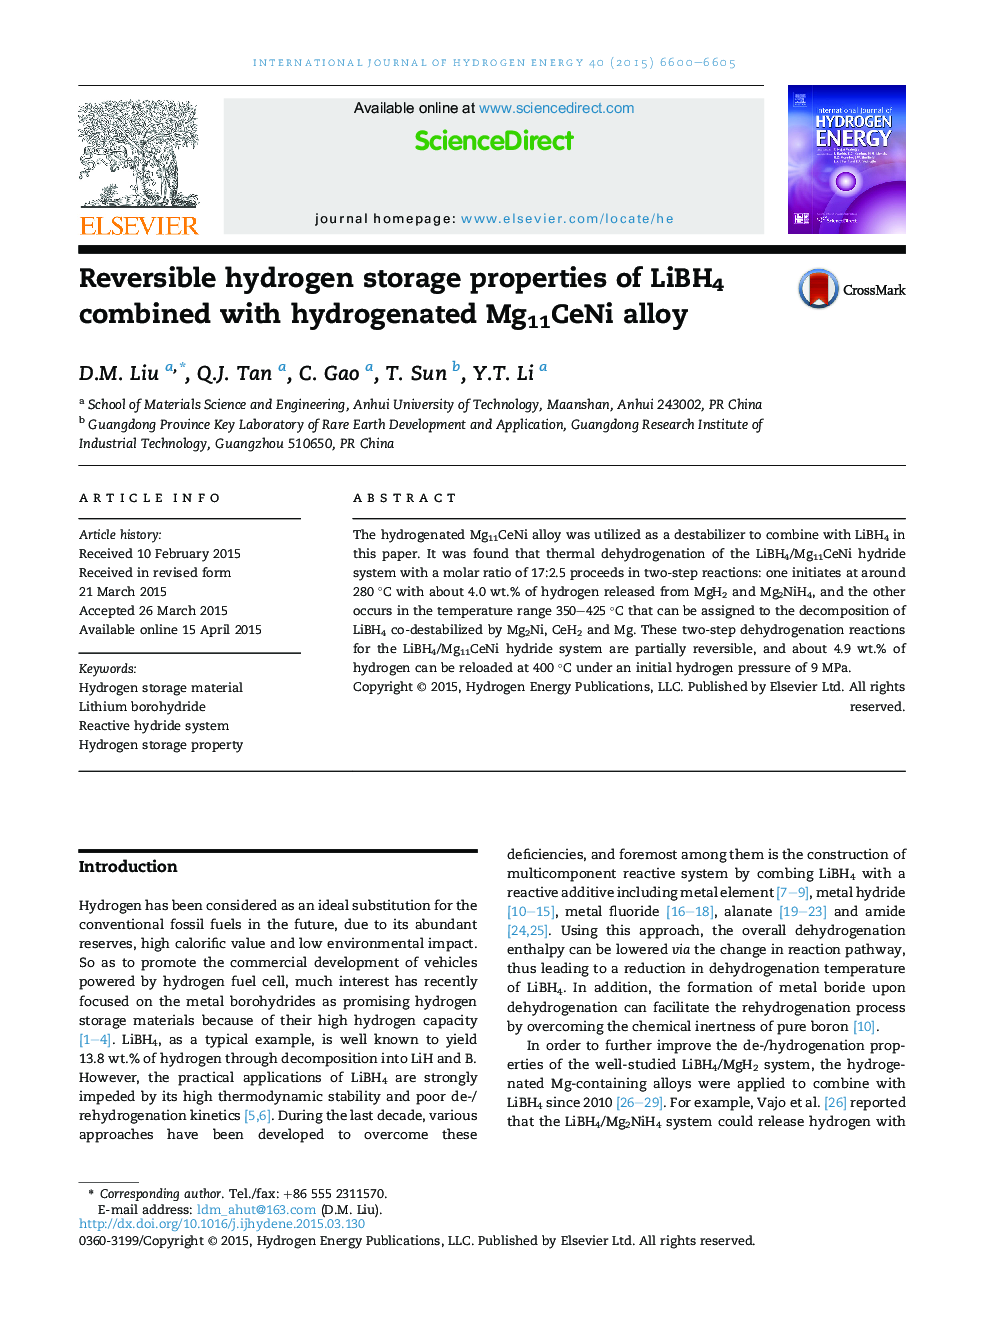 Reversible hydrogen storage properties of LiBH4 combined with hydrogenated Mg11CeNi alloy